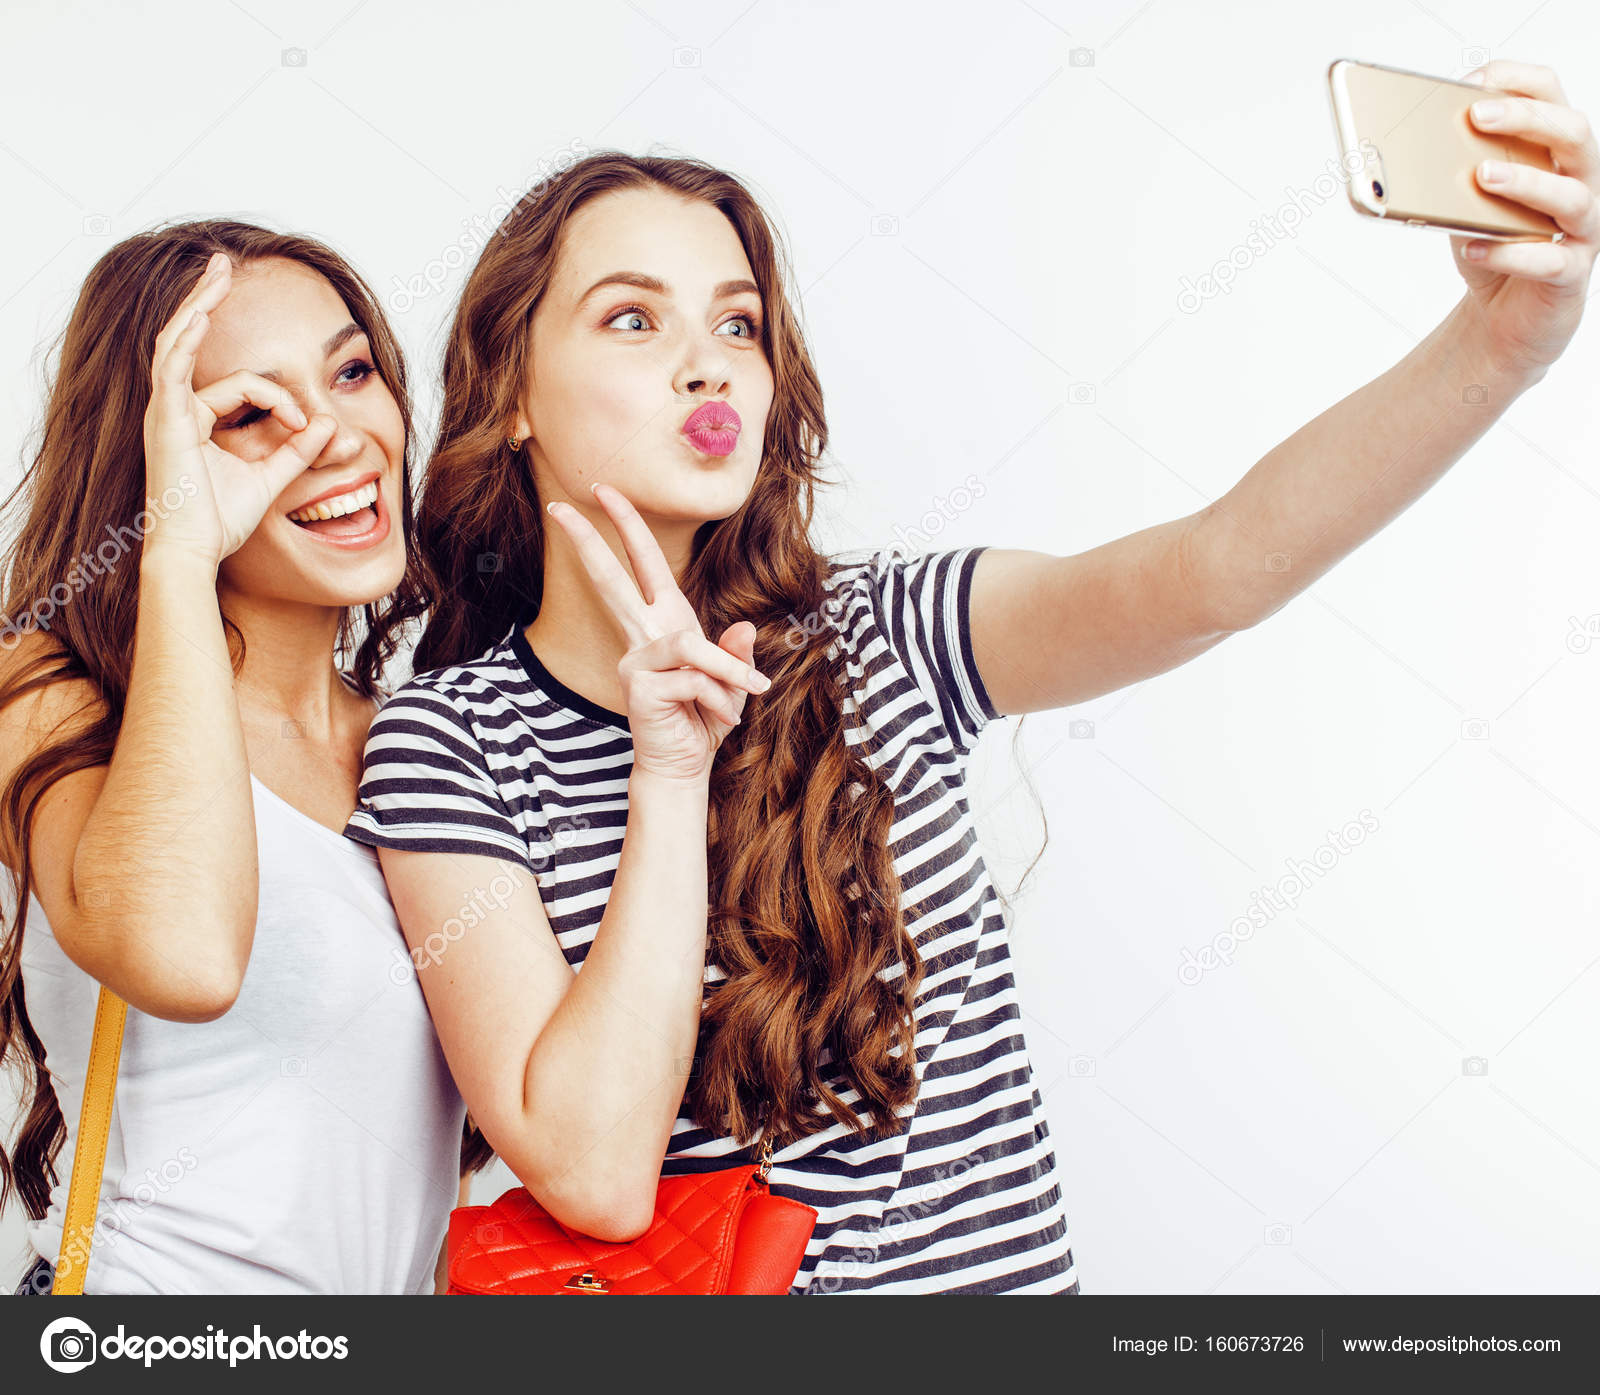 16 Best Selfie Poses to Transform Your Social Media Account